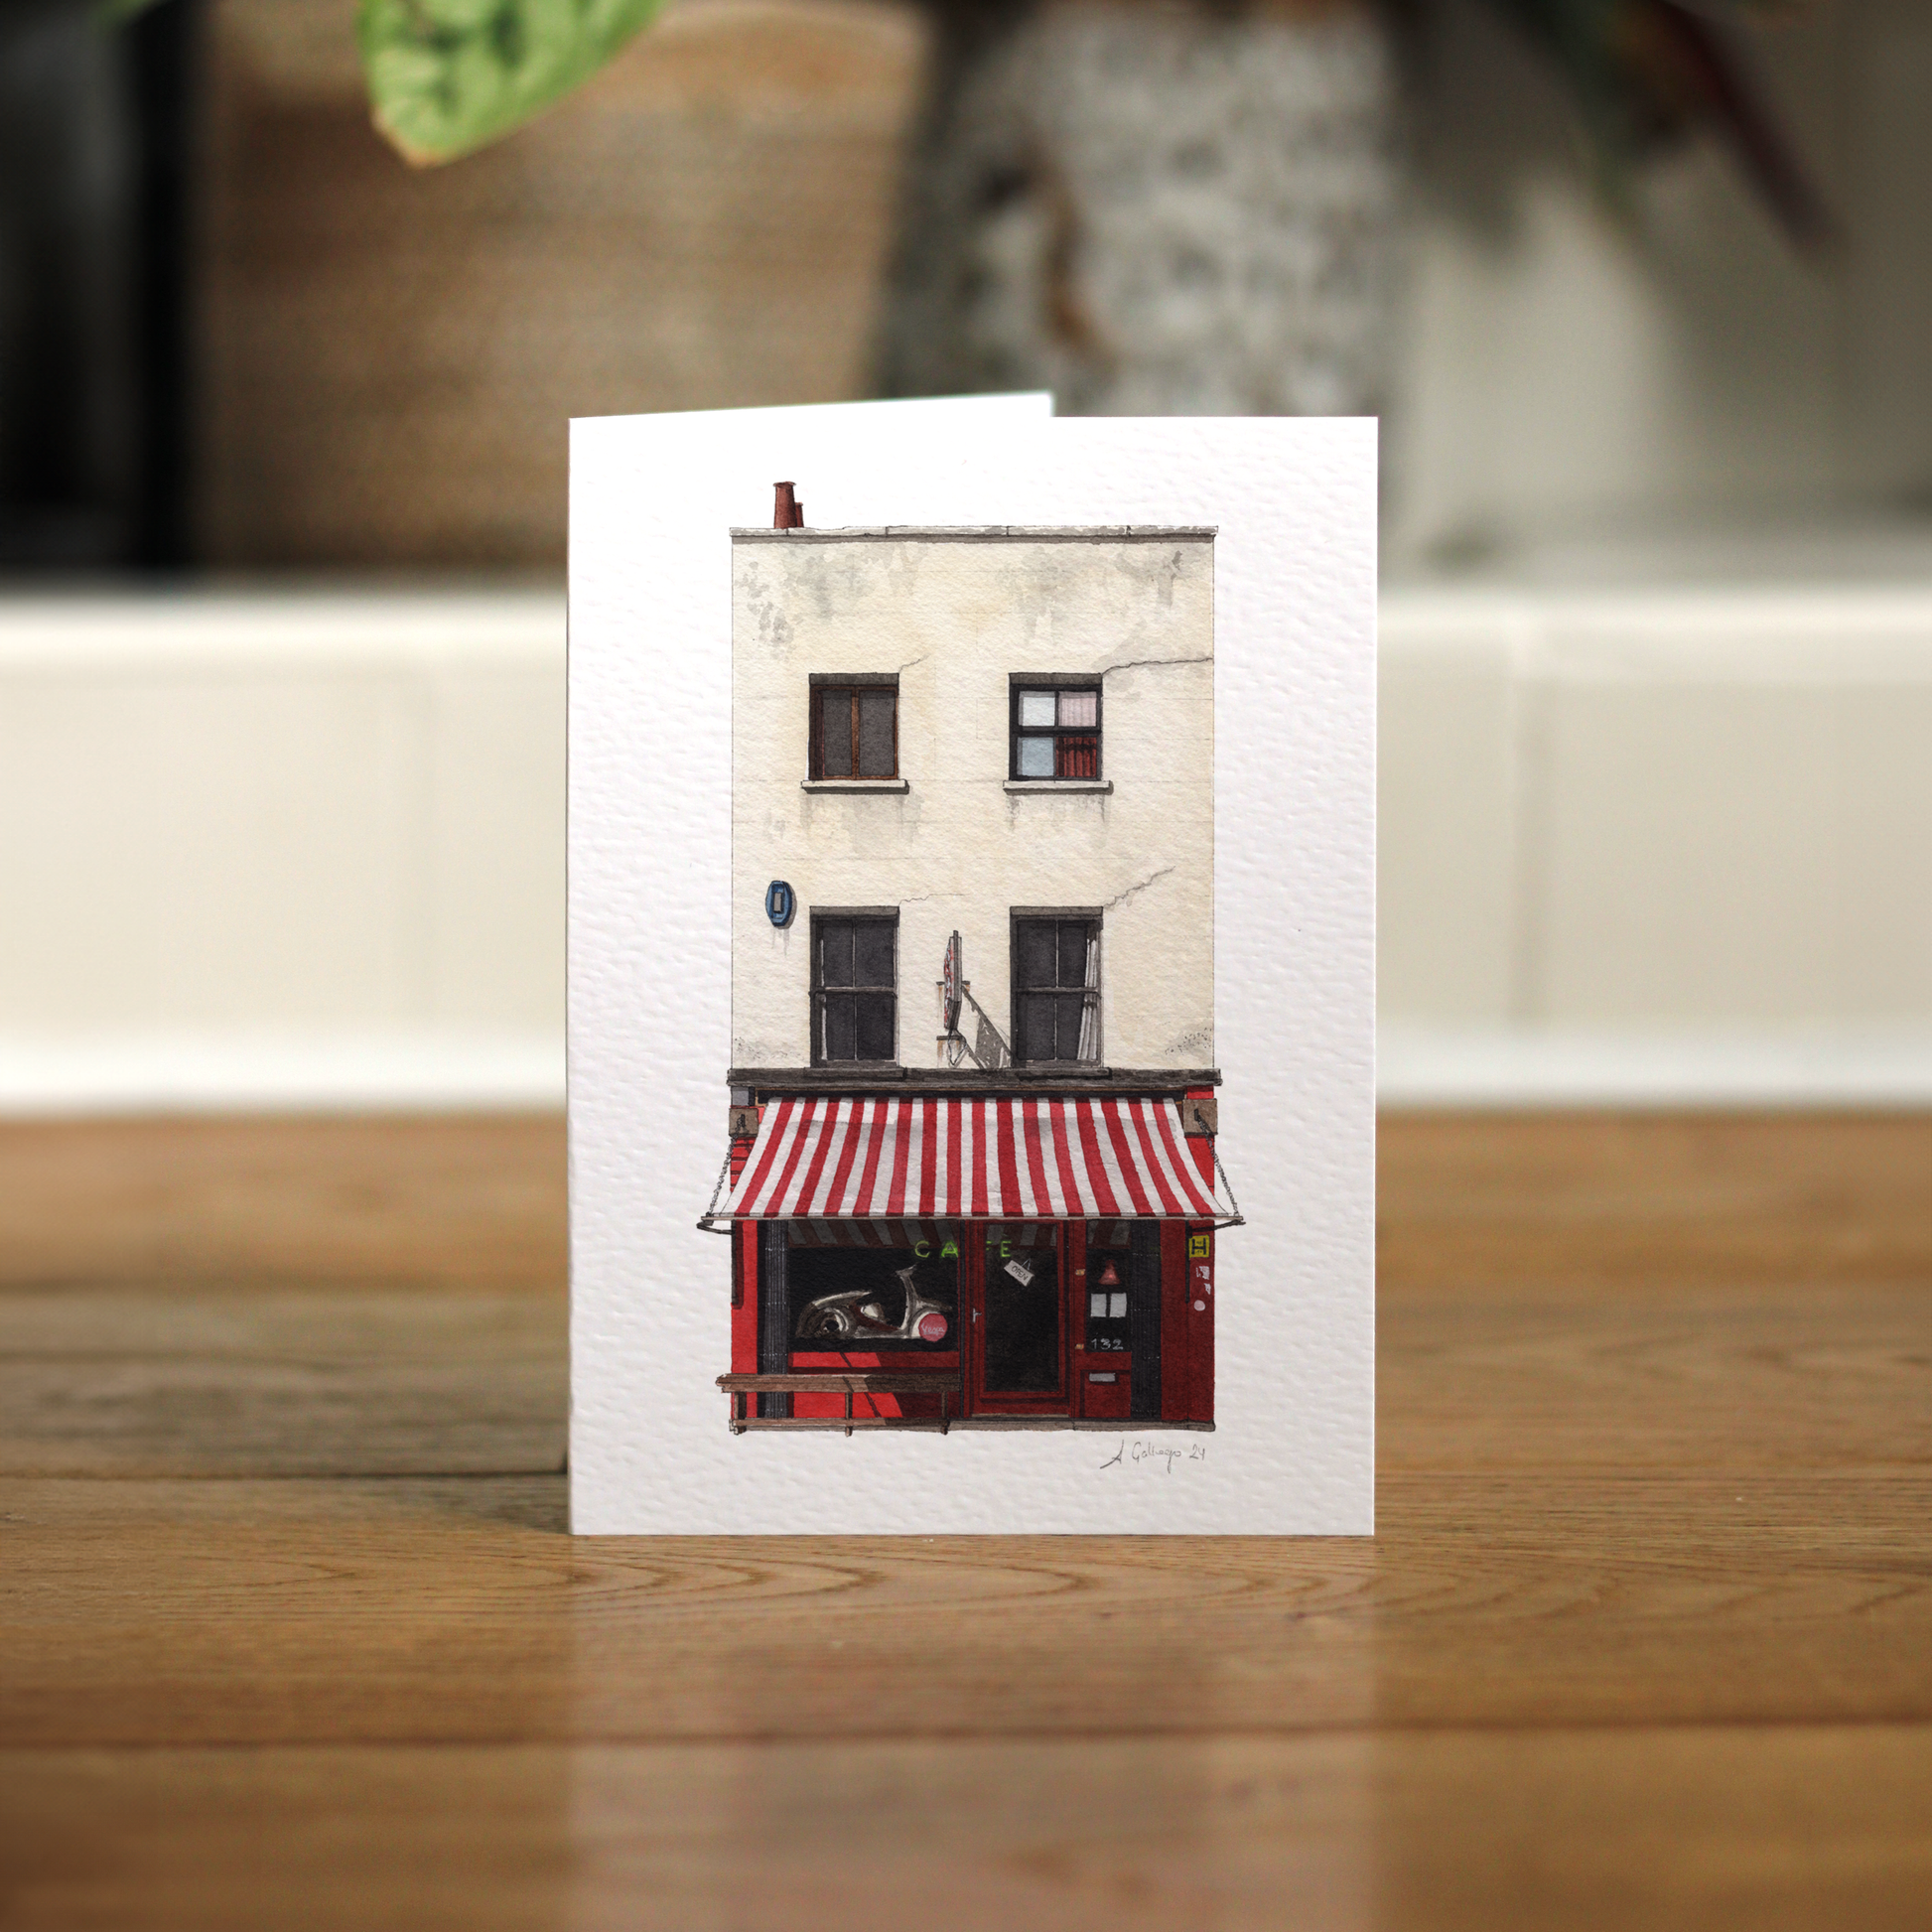 Scootercaffe in Lower Marsh. Greeting card placed in wooden floor